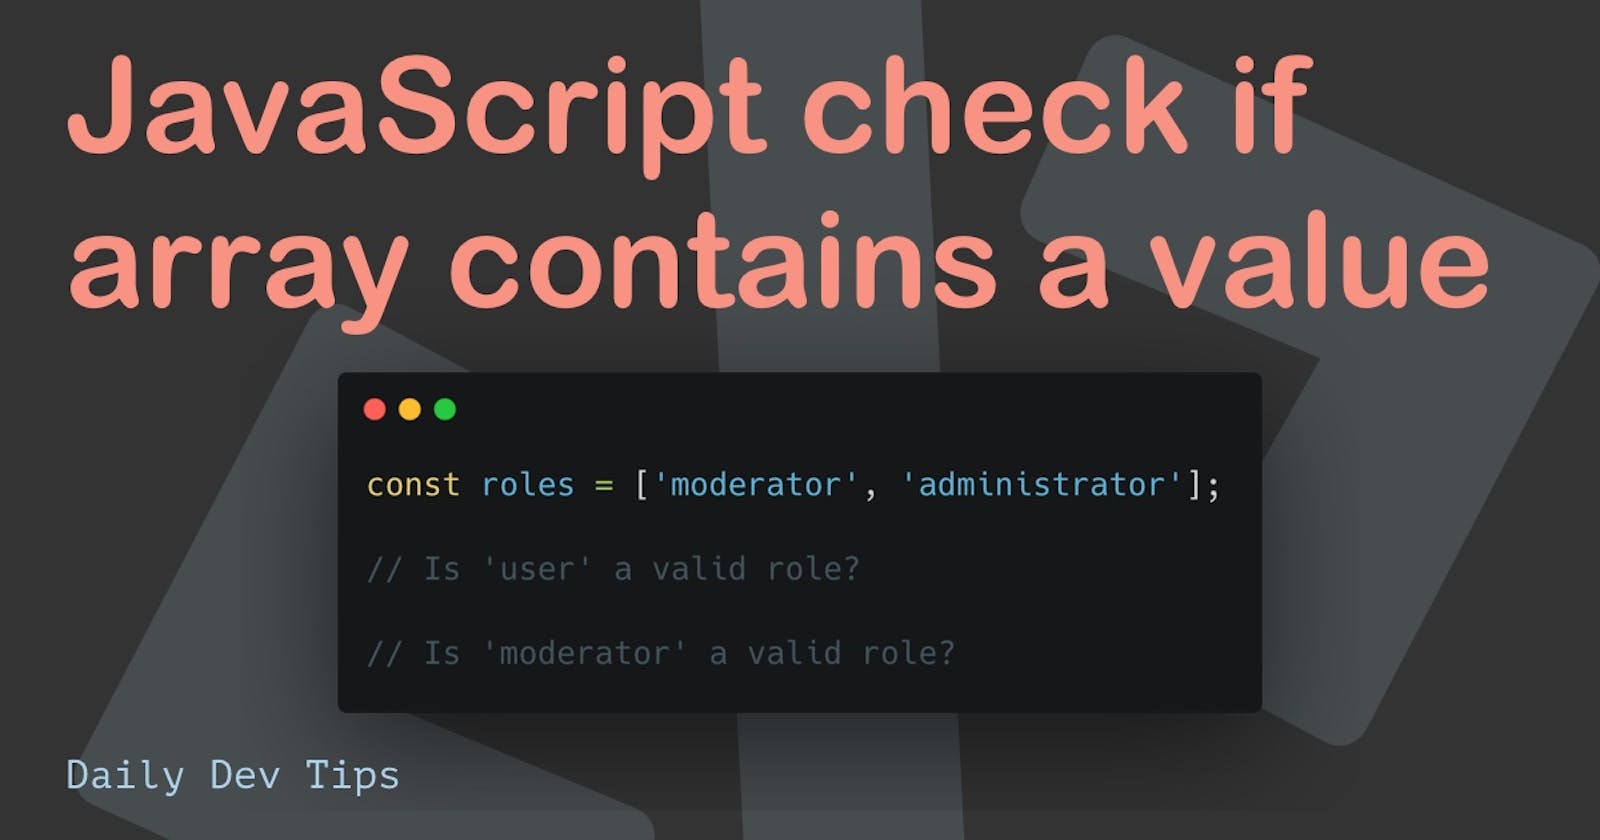 JavaScript check if array contains a value